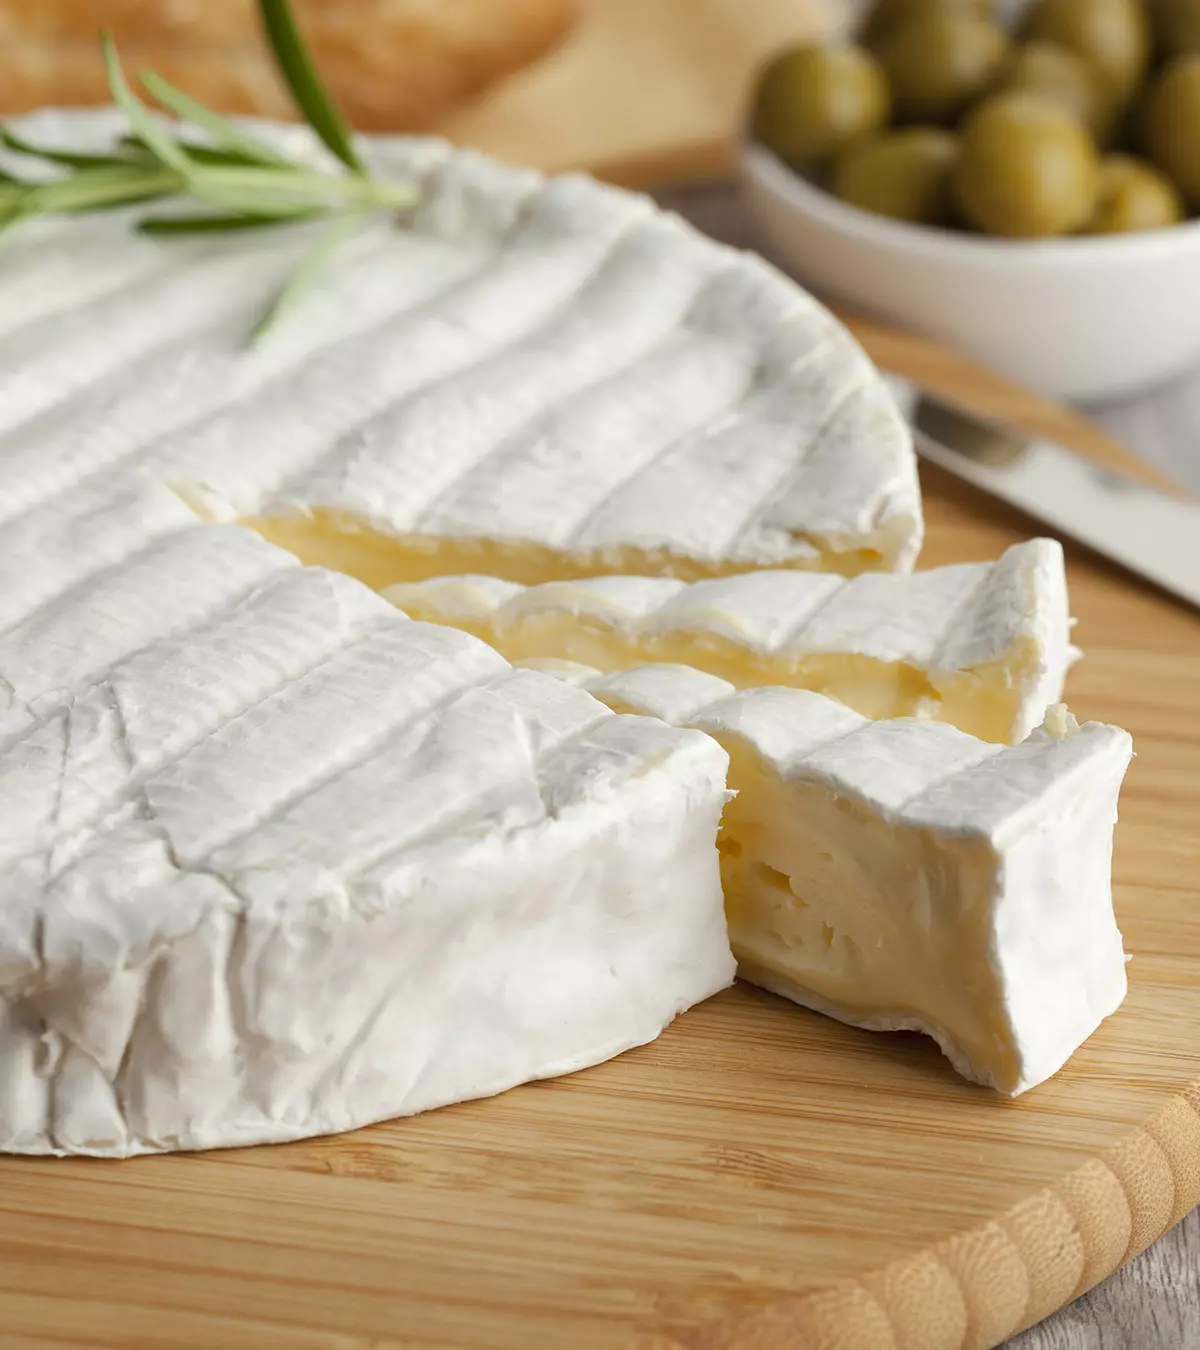 Is It Safe To Eat Brie Cheese While You Are Pregnant?